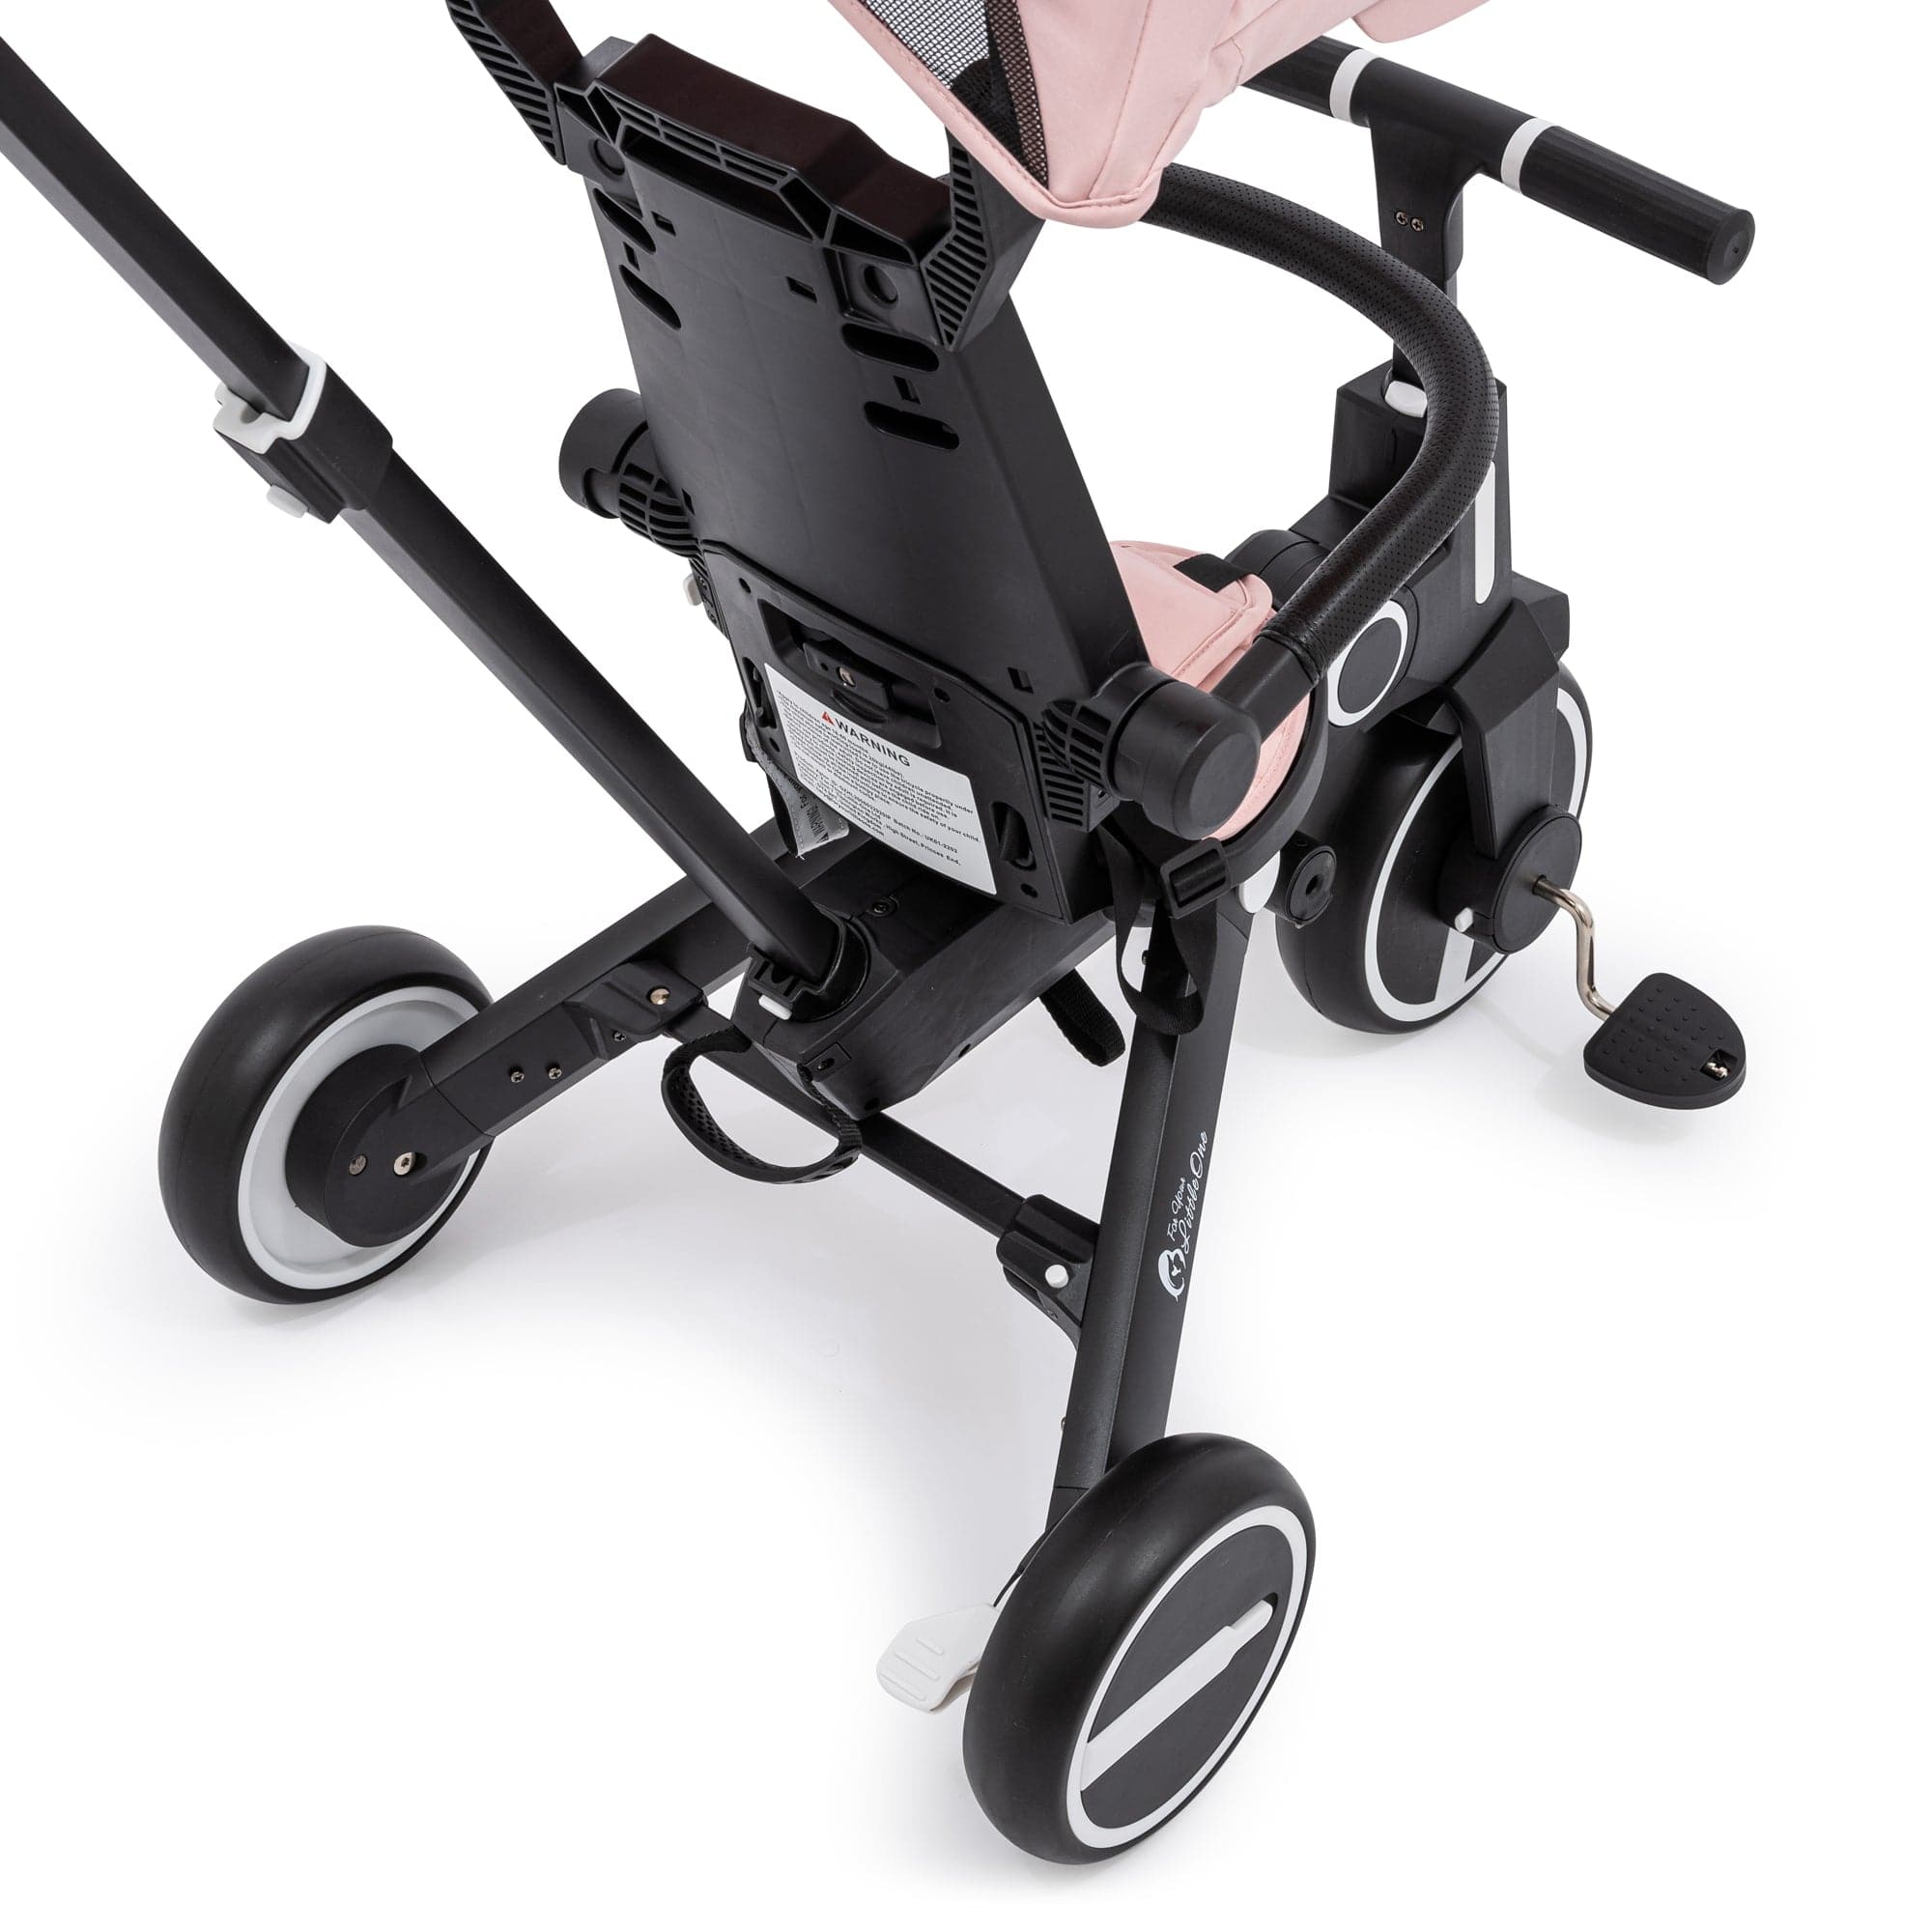 Foryourlittleone Xplor Foldable Trike - Pastel Pink -  | For Your Little One